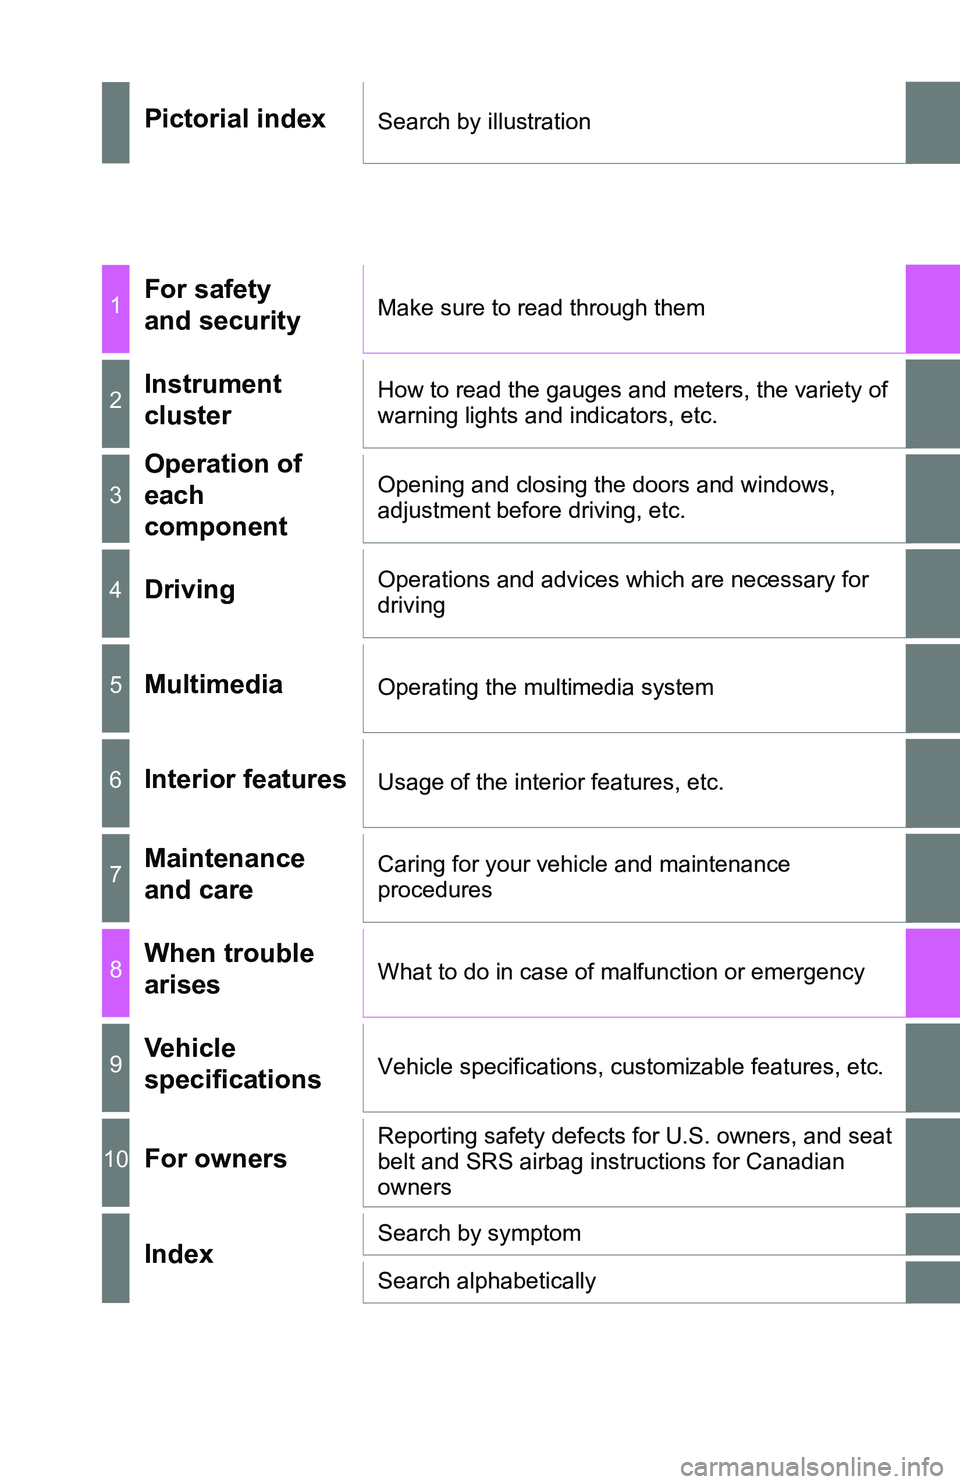 TOYOTA TACOMA 2016  Owners Manual (in English) Pictorial indexSearch by illustration
1For safety 
and securityMake sure to read through them
2Instrument 
clusterHow to read the gauges and meters, the variety of 
warning lights and indicators, etc.